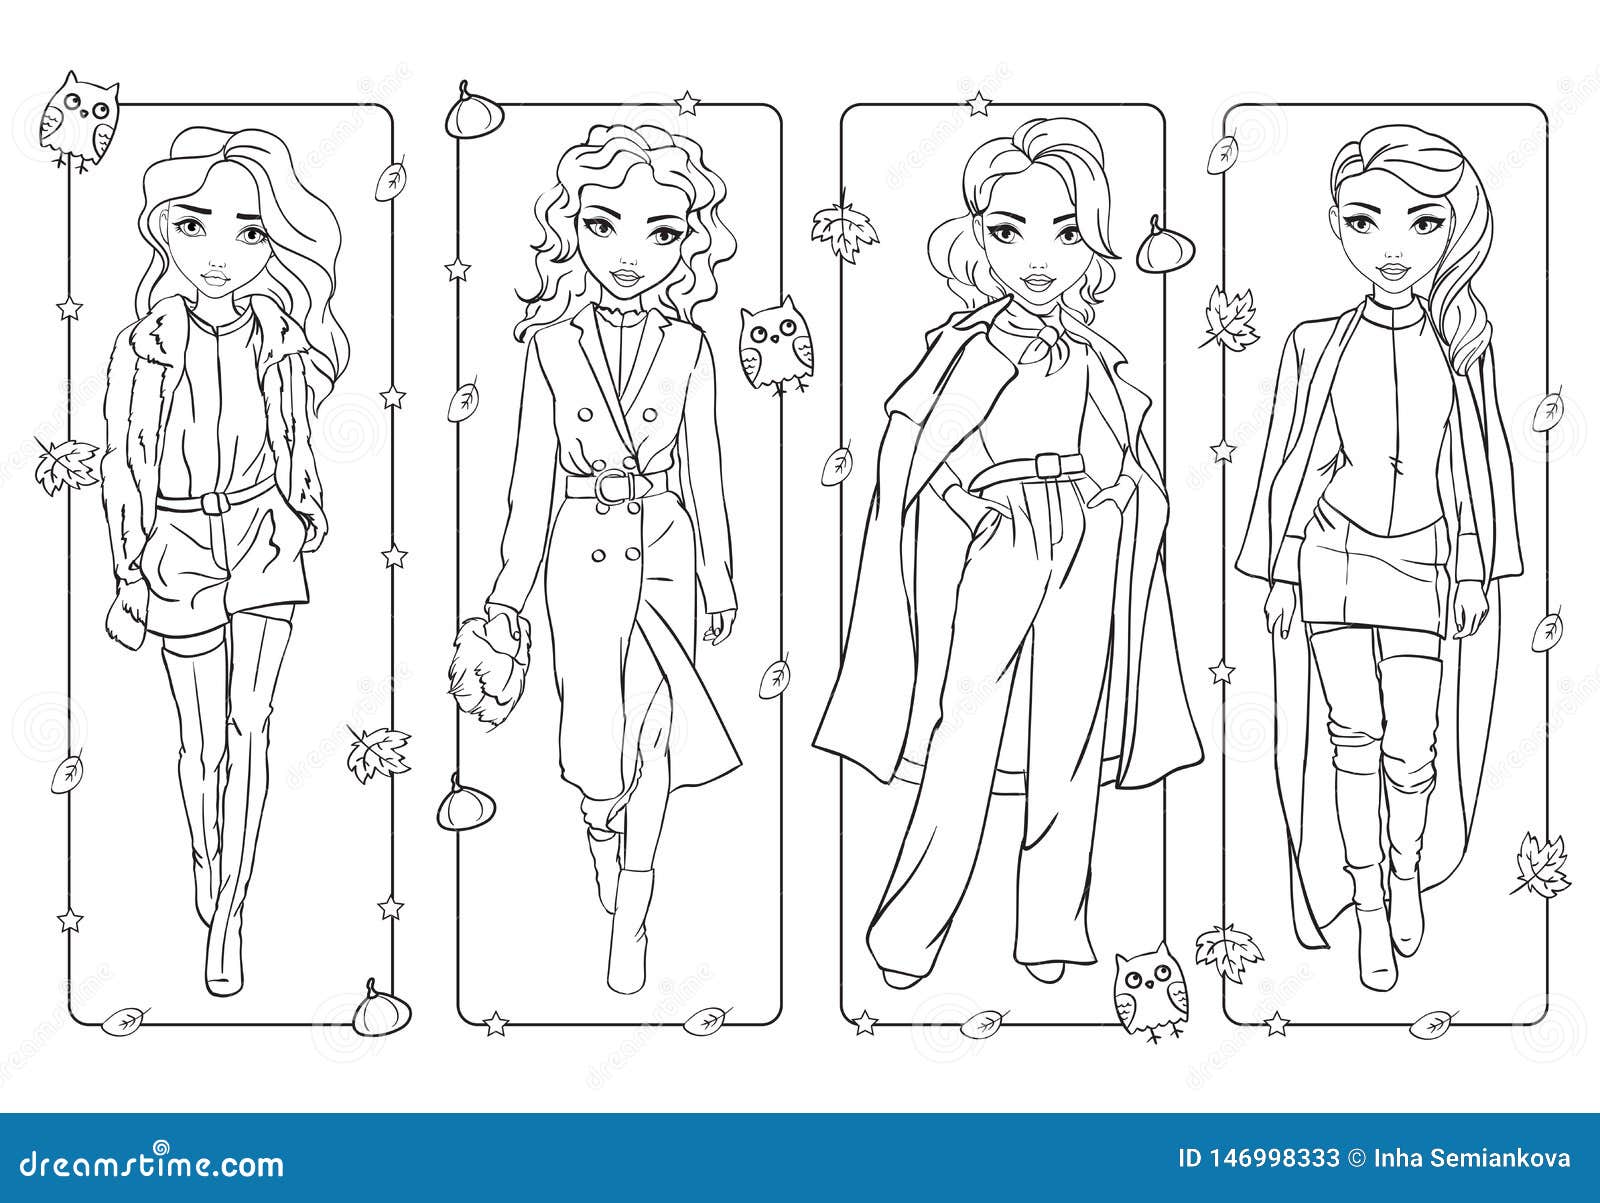 Coloring Girls in Trench Coats and High Boots Stock Vector ...